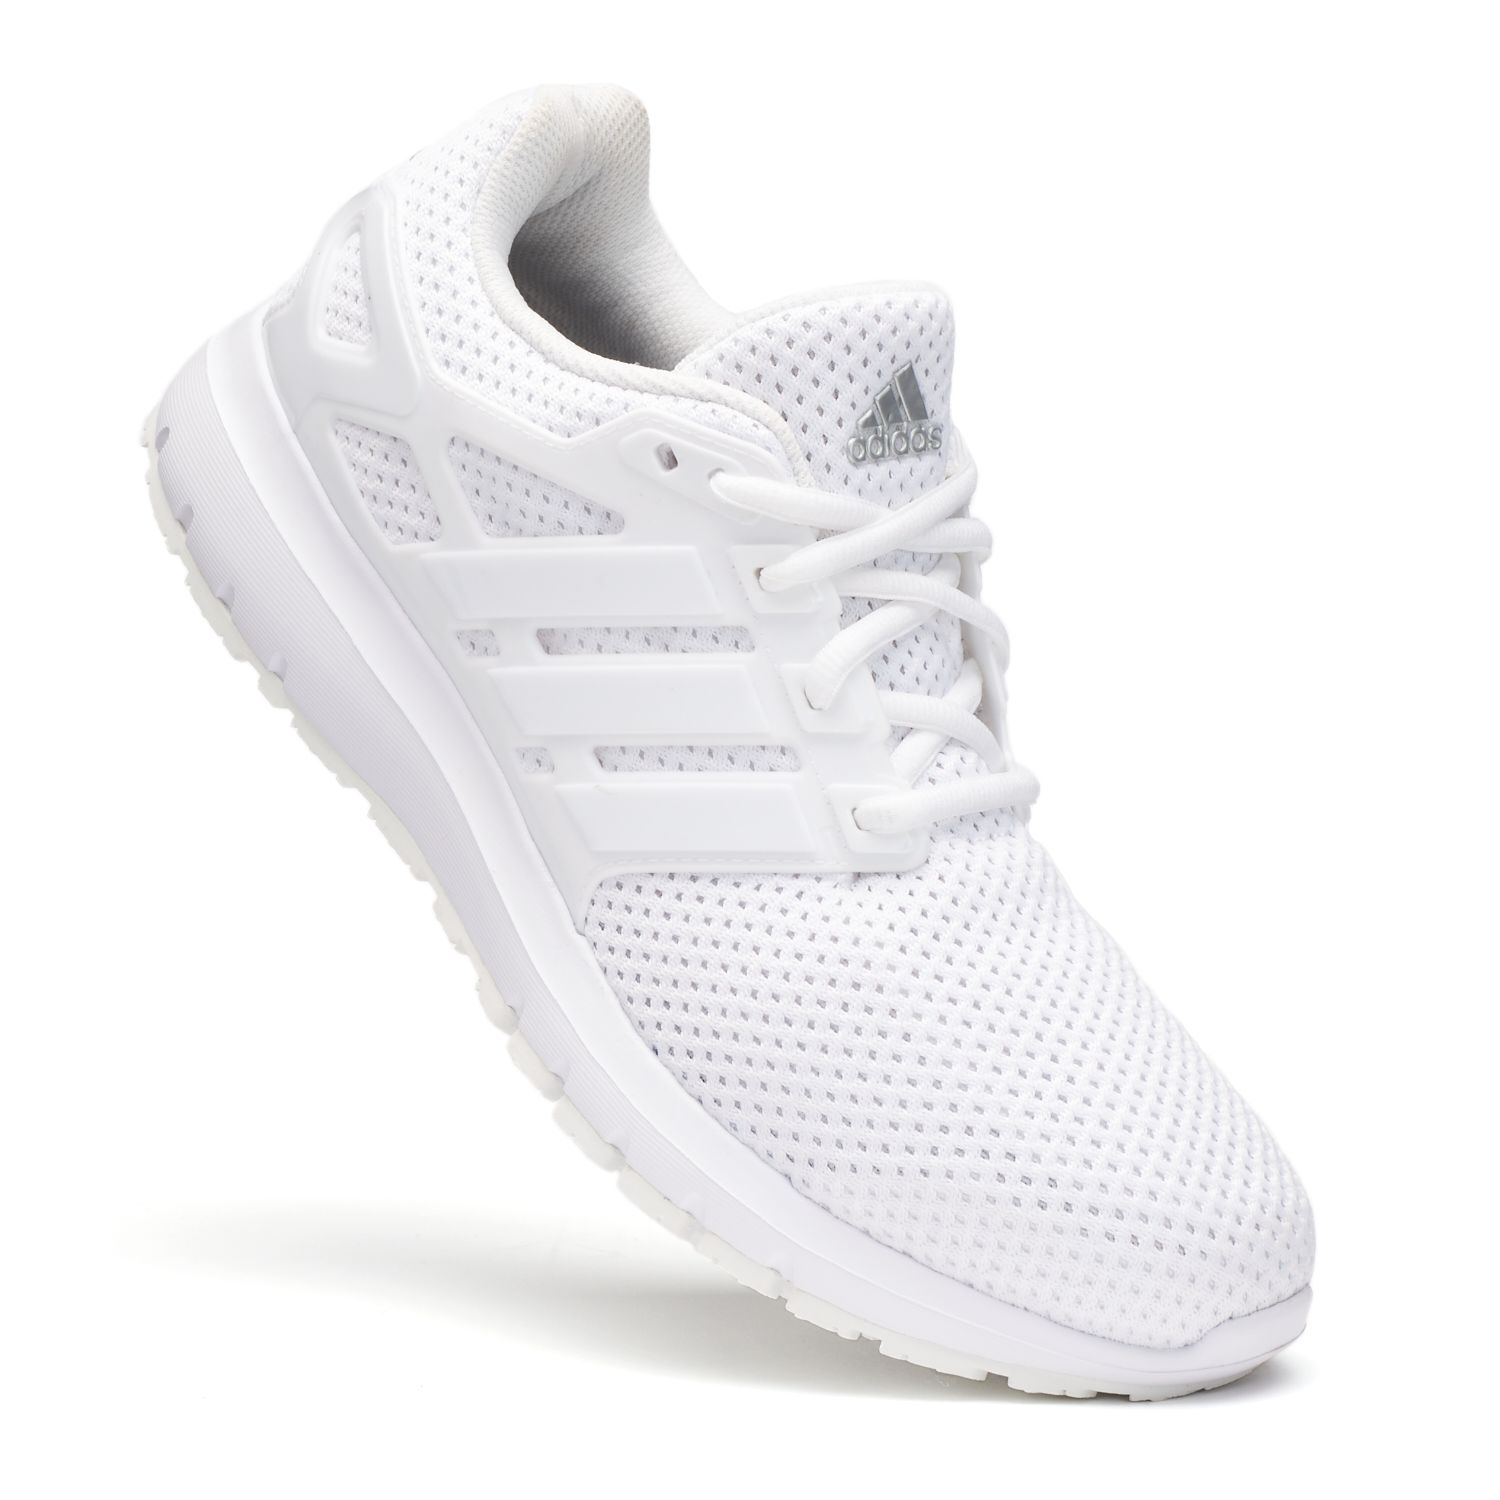 adidas energy cloud running shoes